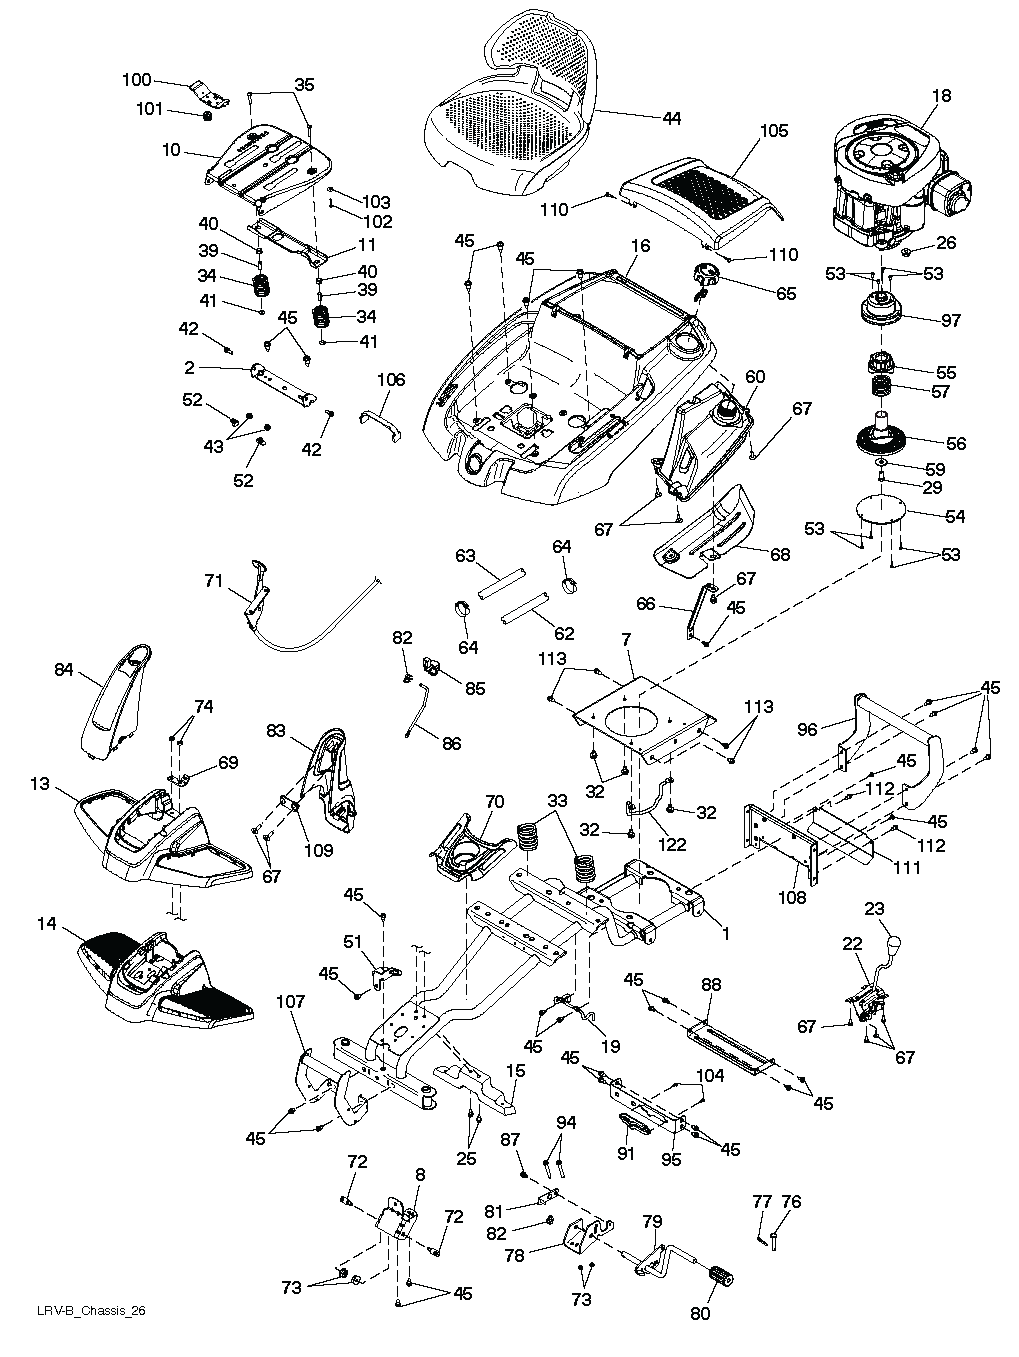 Chassis and appendix 532436176, 532180166, 532436177, 532436860, 532441805, 532199370, 532442071, 532442075, 532442069, 532439397, 000000000, 532442908, 532442130, 532149846, 872140424, 873640400, 532438921, 817060620, 587613301, 532123740, 872050412, 532134300, 532121248, 586668901, 587907801, 596040501, 532436612, 532428867, 532428856, 532145006, 532438562, 532436473, 532435808, 532441925, 532436479, 532199162, 532 43 78-01, 532400414, 532414119, 532123487, 532438596, 532436606, 532421756, 532439851, 532437427, 532442068, 532437857, 593824001, 583612701, 586668901, 877100812, 876020208, 532437056, 532437057, 532429693, 532437374, 596029401, 532439368, 532439289, 532437660, 532438762, 532165492, 532428110, 532437401, 874490548, 532444271, 532436955, 532442913, 595088102, 532198200, 874780612, 583789501, 818101008, 532442078, 532436834, 532436593, 532437168, 532439008, 532442145, 532438171, 596437001, 596030701, TBD